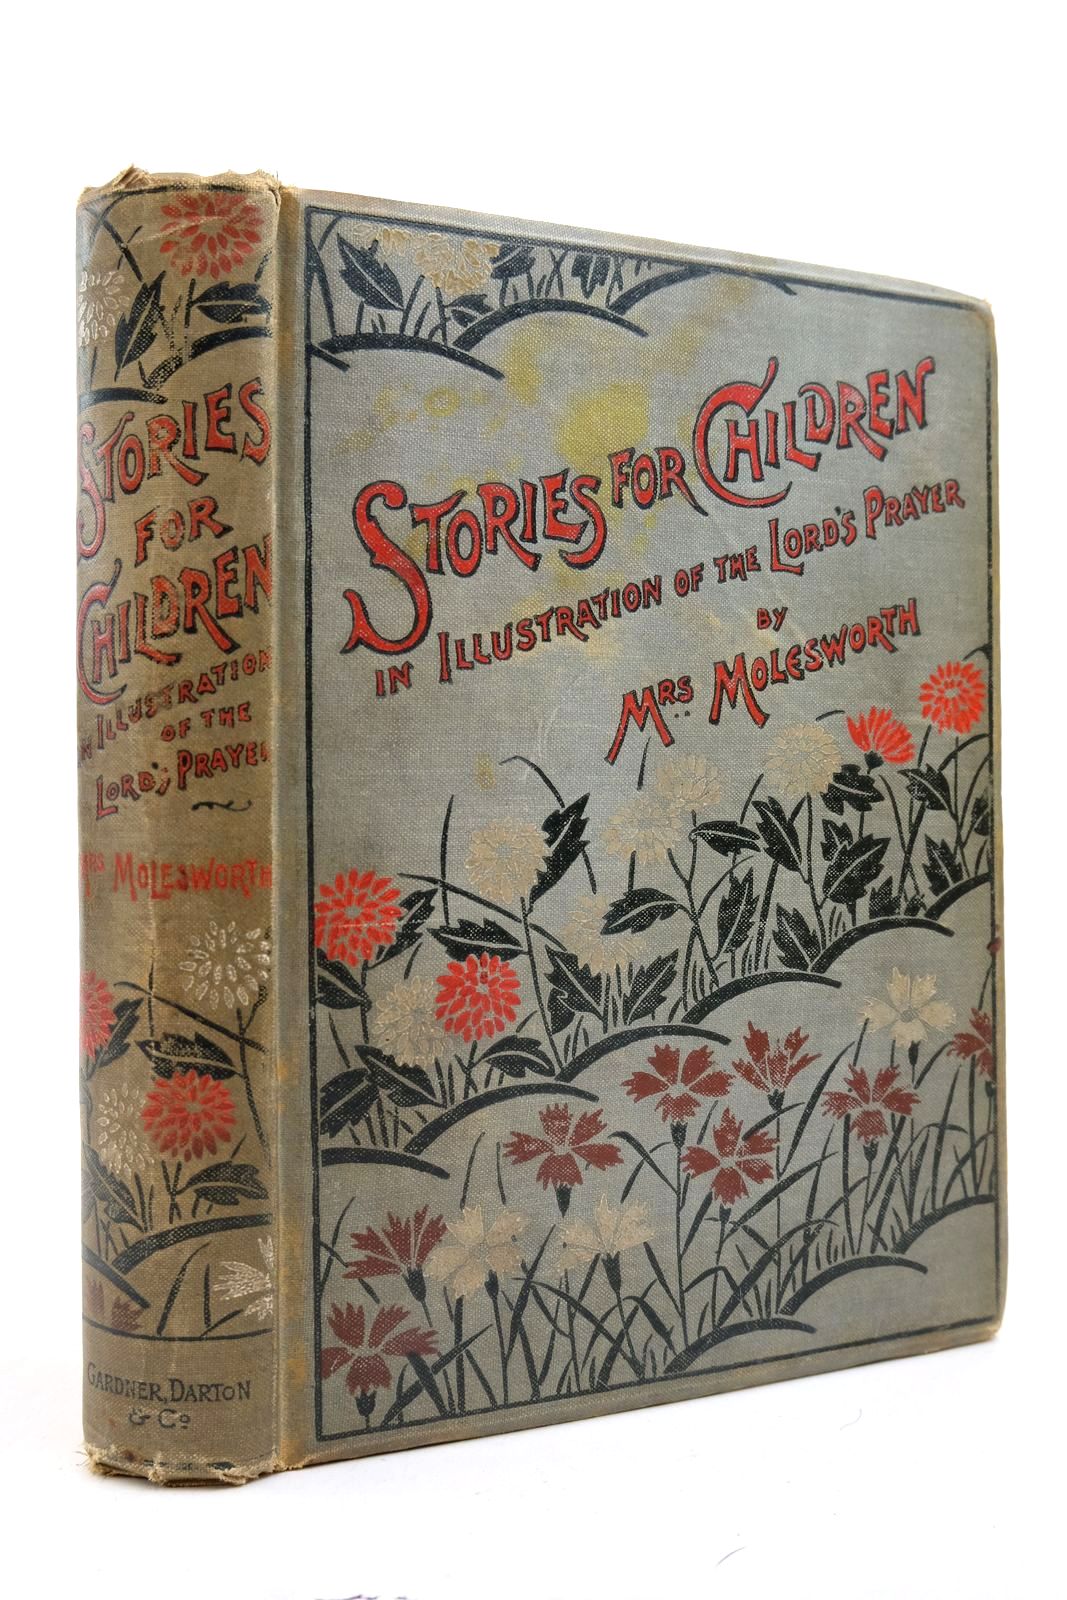 Photo of STORIES FOR CHILDREN written by Molesworth, Mrs. illustrated by Browne, Gordon
Barnes, Robert
Edwards, M. Ellen
Groome, W.H.C. published by Gardner, Darton & Co. (STOCK CODE: 2140035)  for sale by Stella & Rose's Books